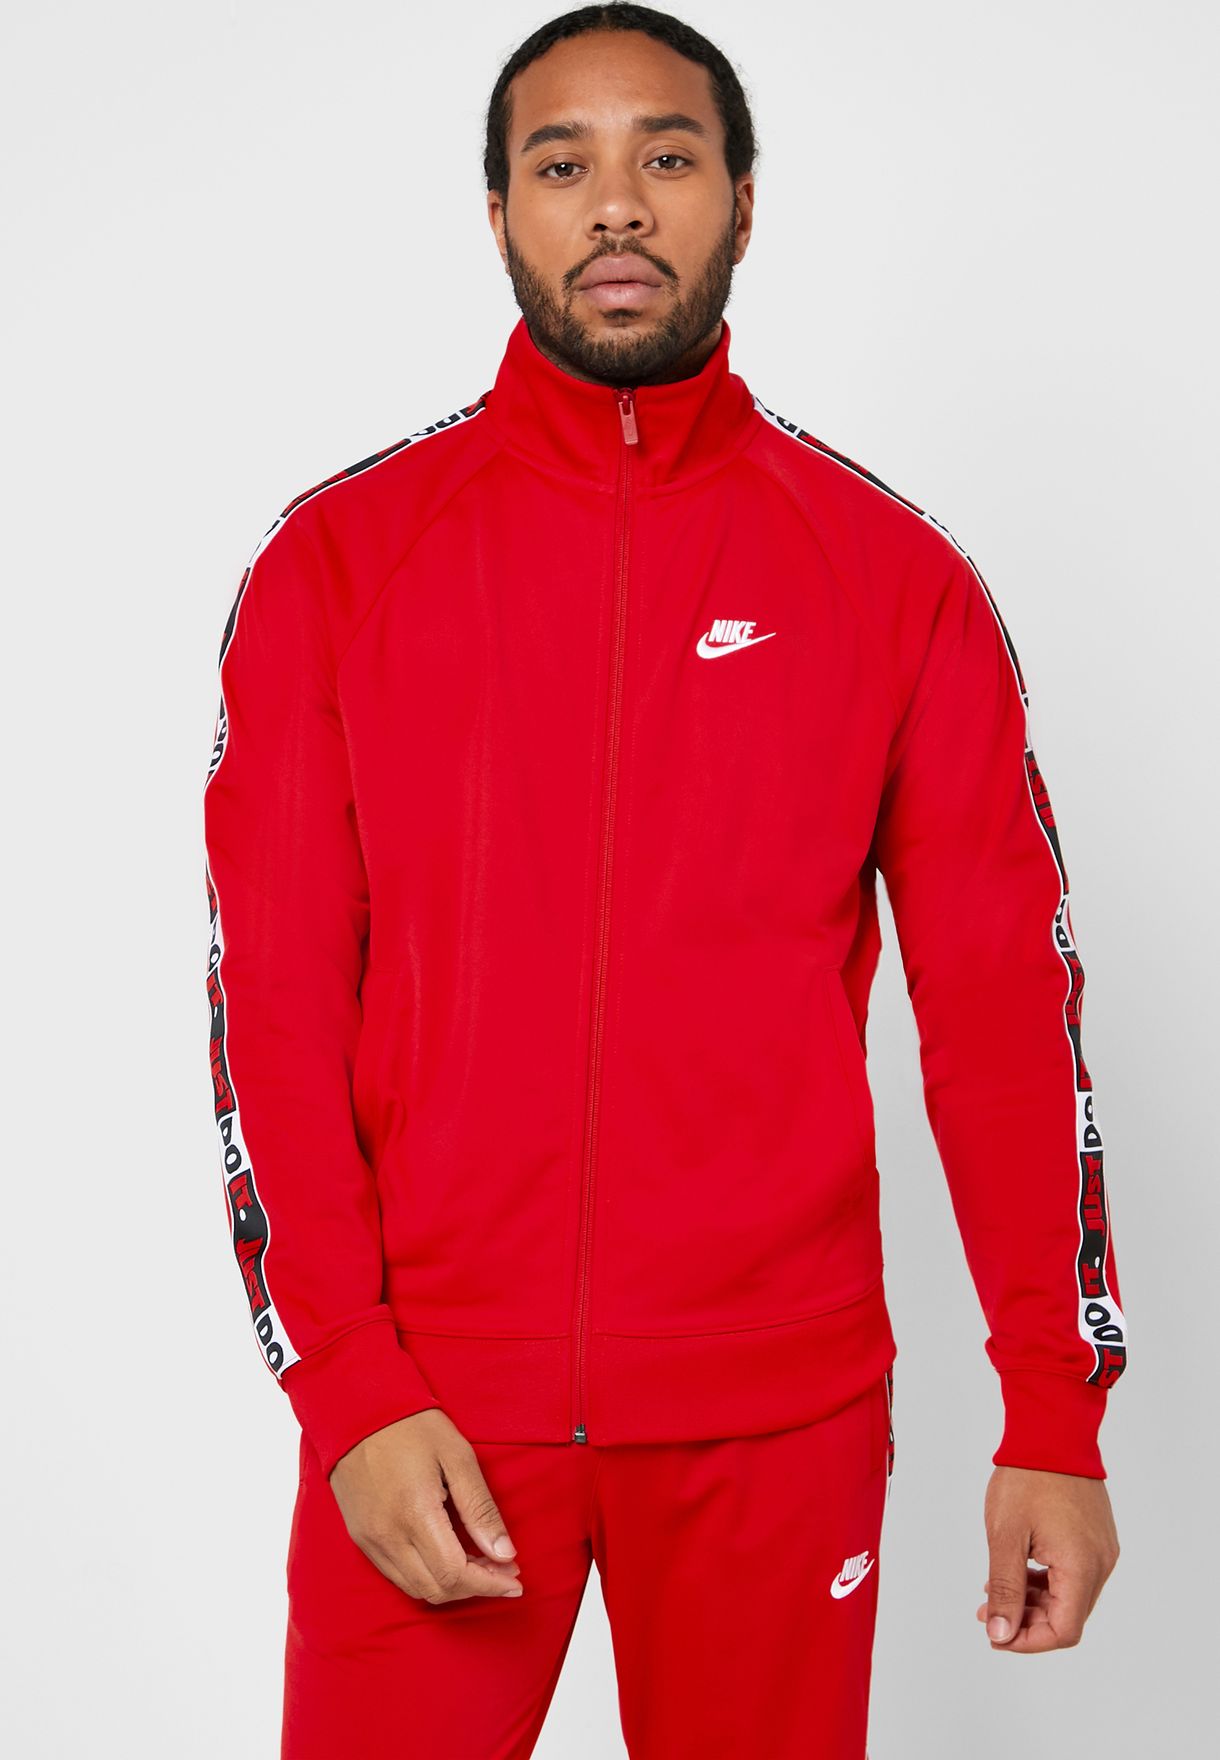 nibber nike outfit